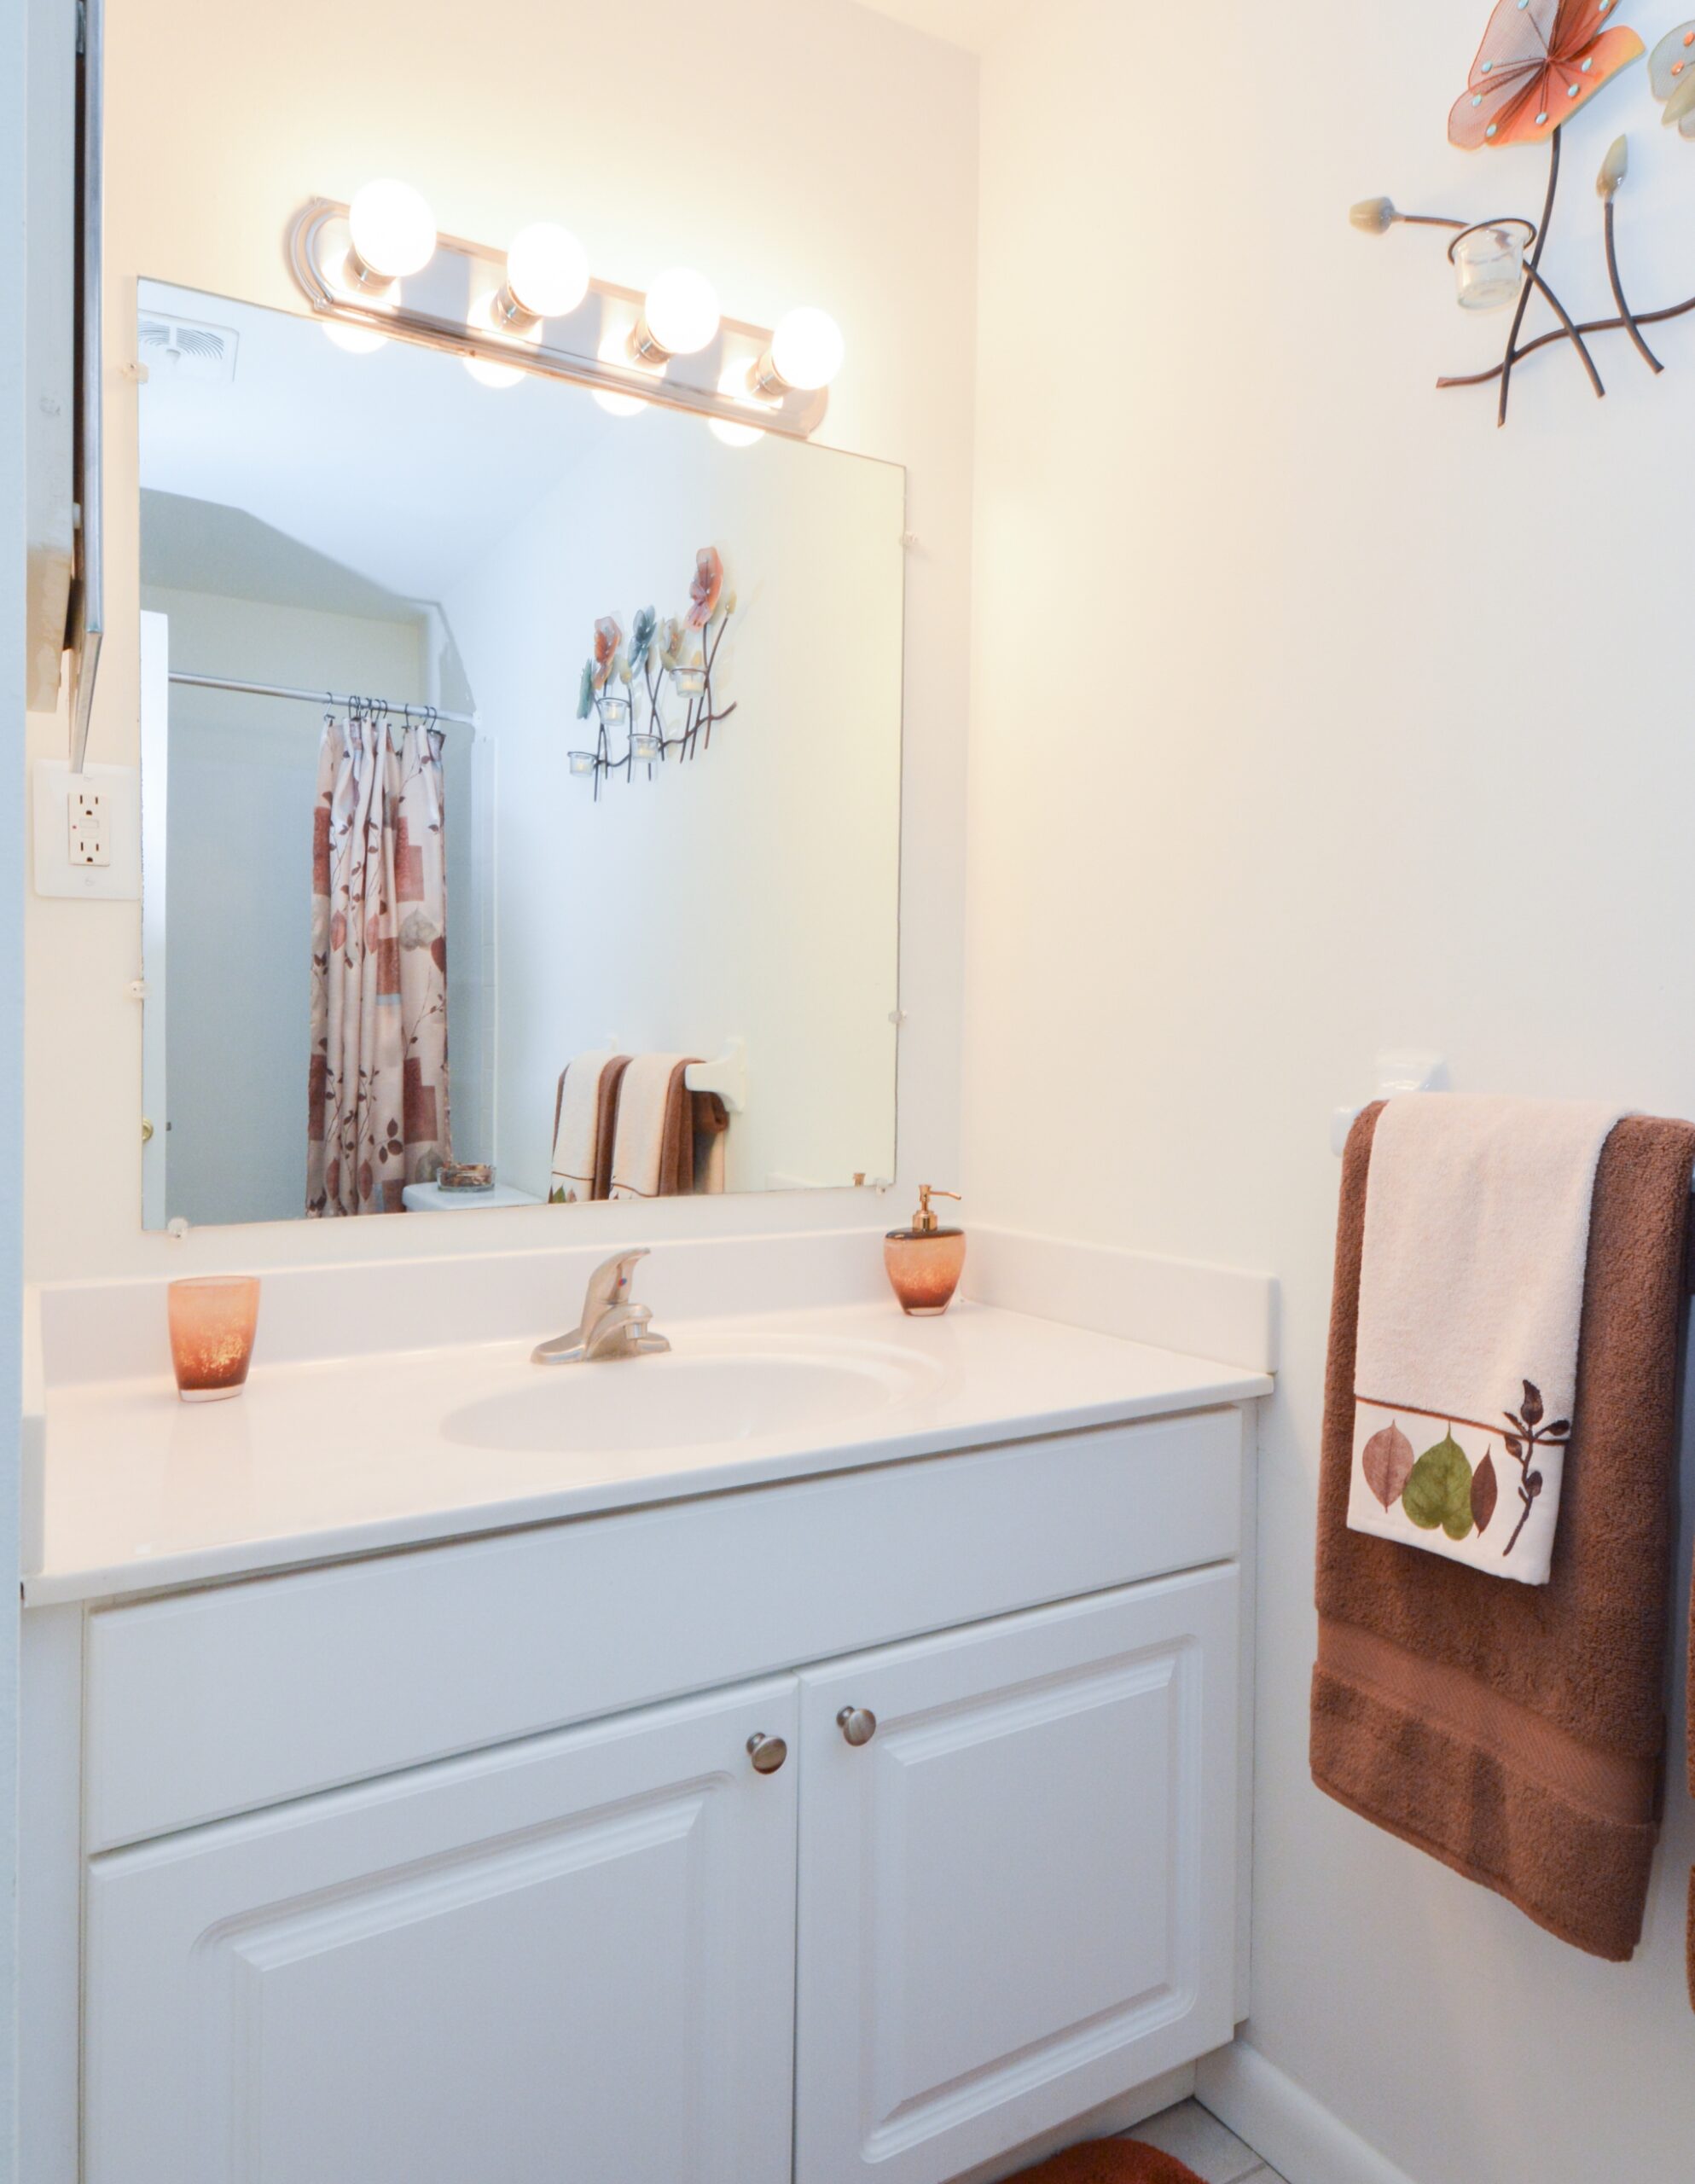 Bathroom with a large mirror, white countertops, and extra lighting above the mirror.